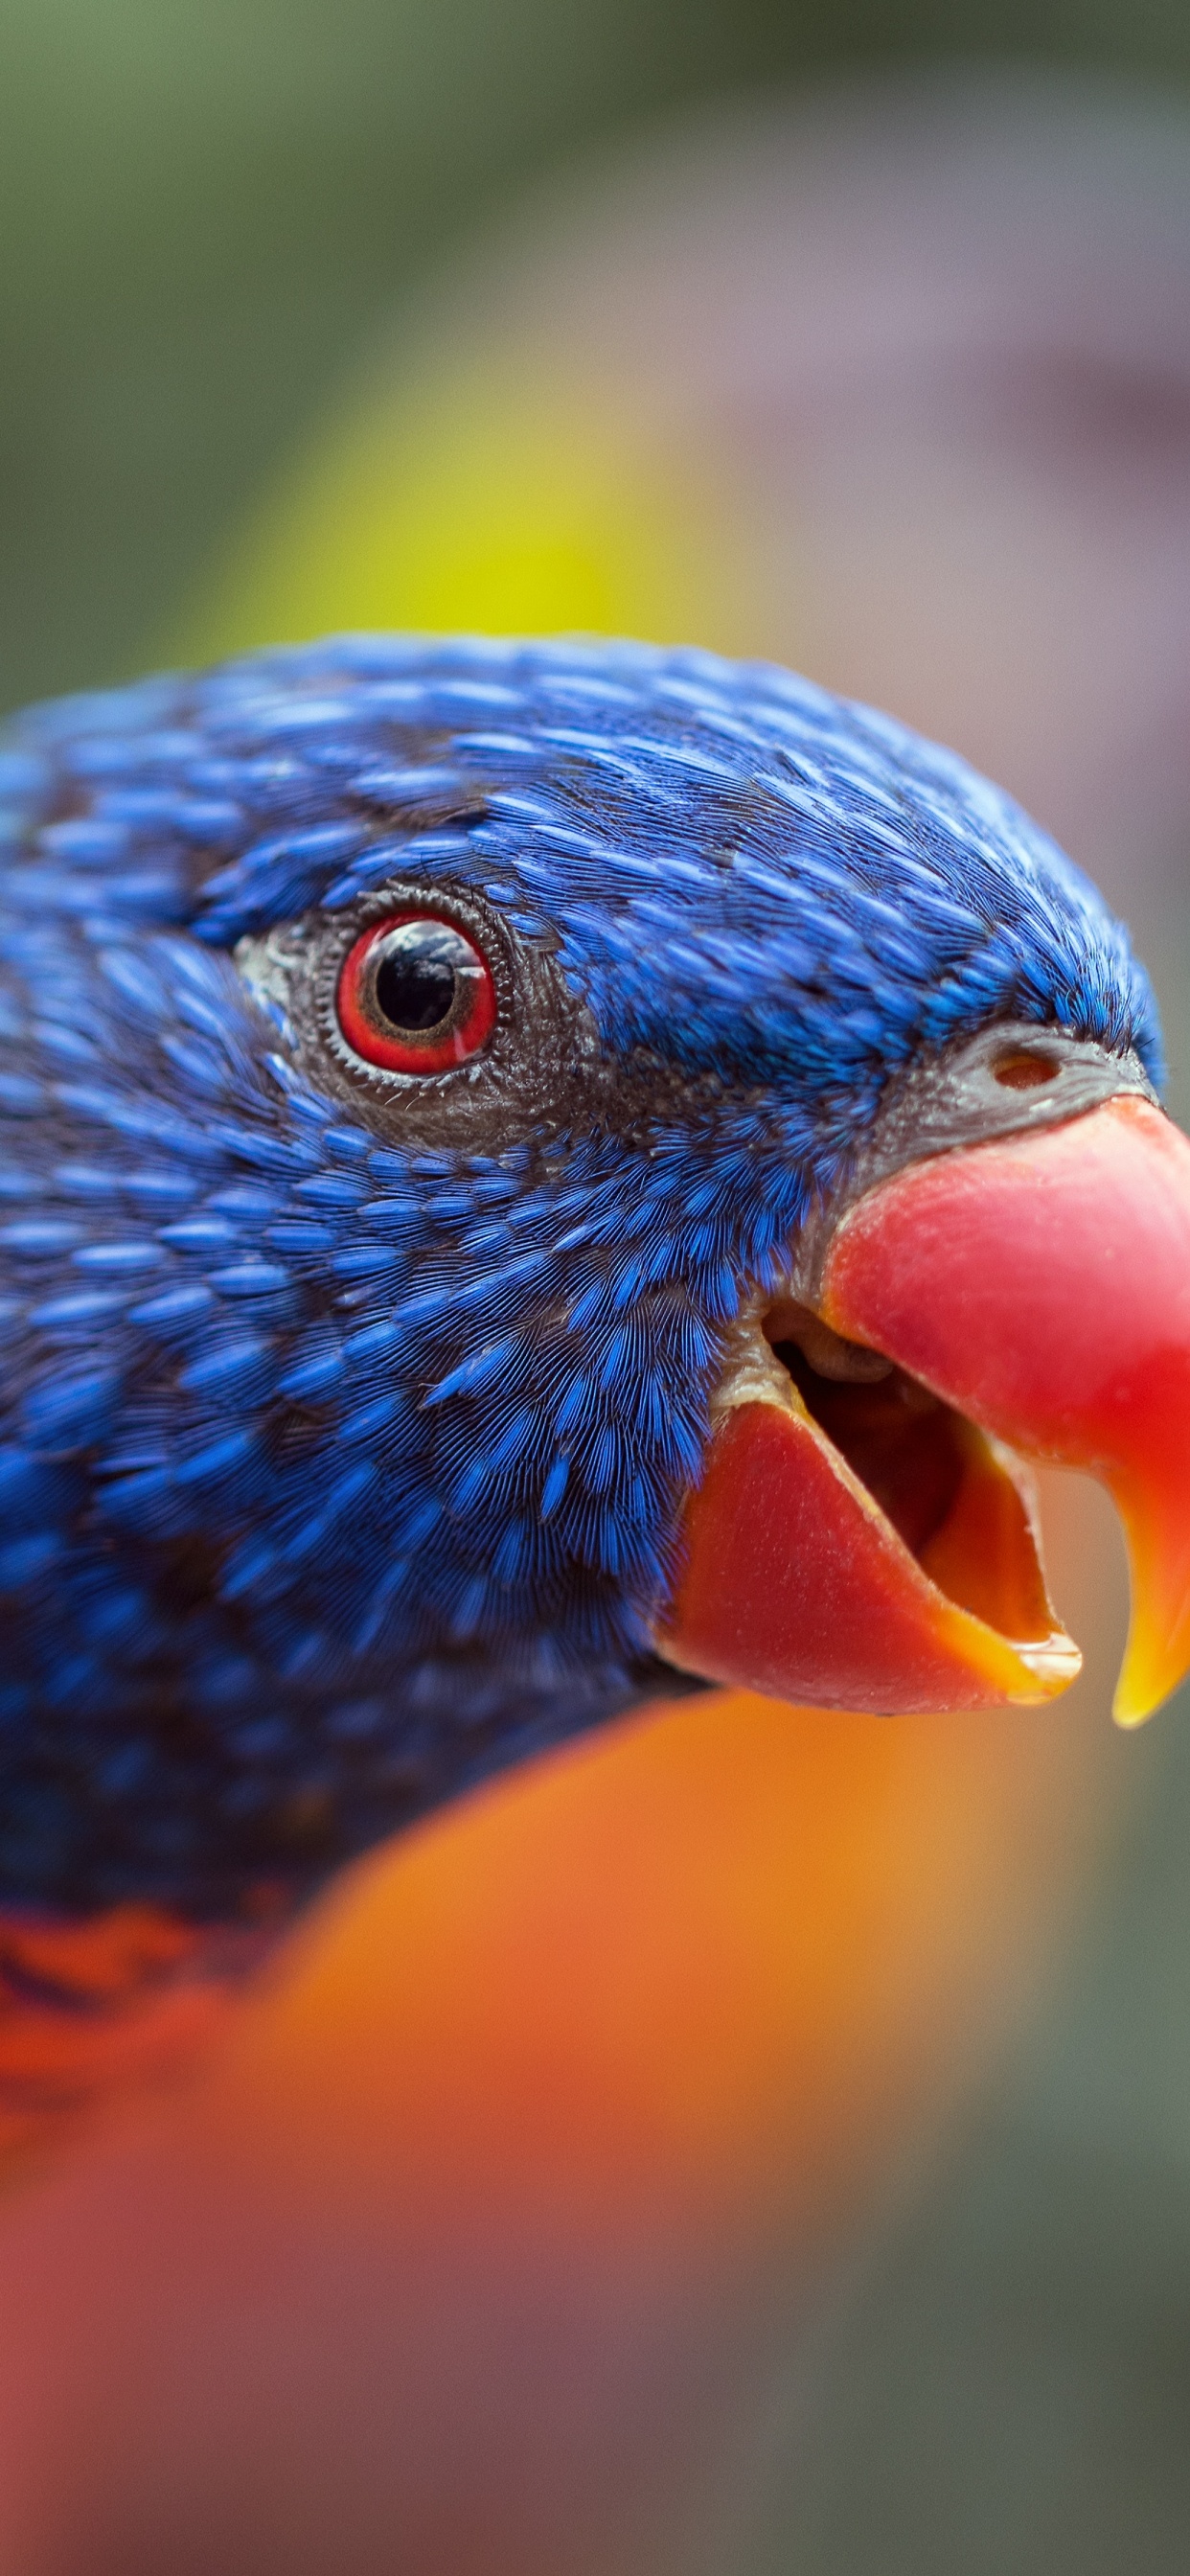 Blue Yellow and Red Bird. Wallpaper in 1242x2688 Resolution